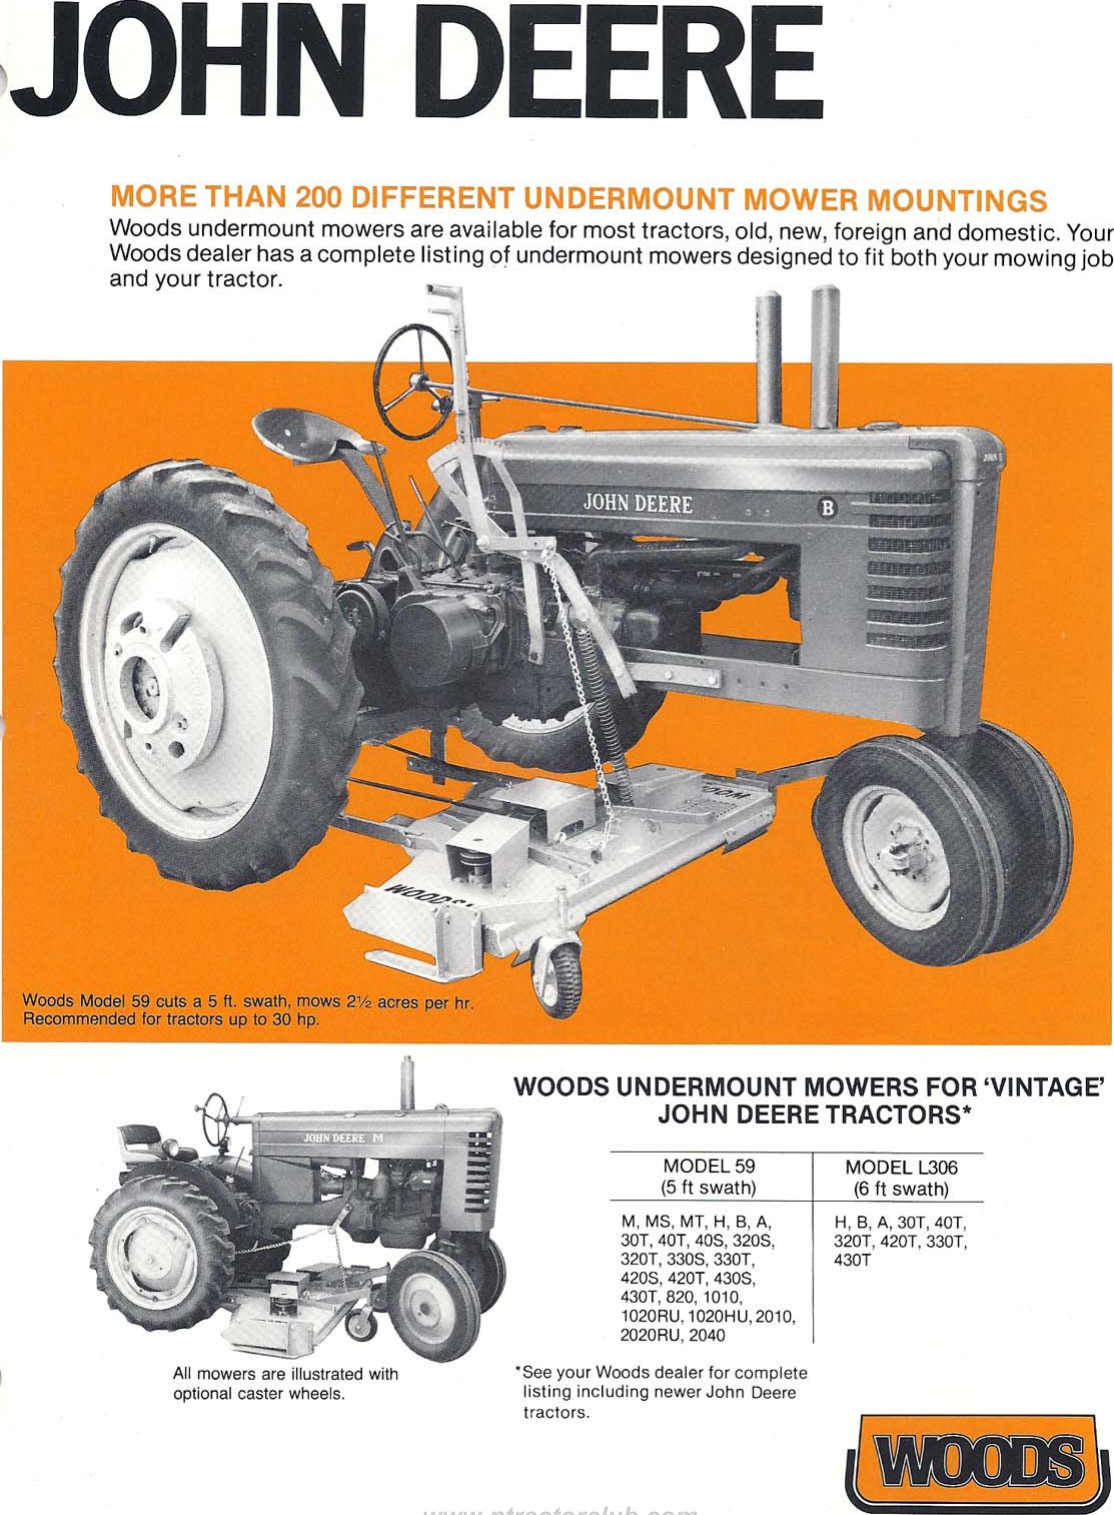 Page 3 of 6 - Woods Undermount Mowers For 'Vintage' Tractors  !! Vintage - Ad Brochure